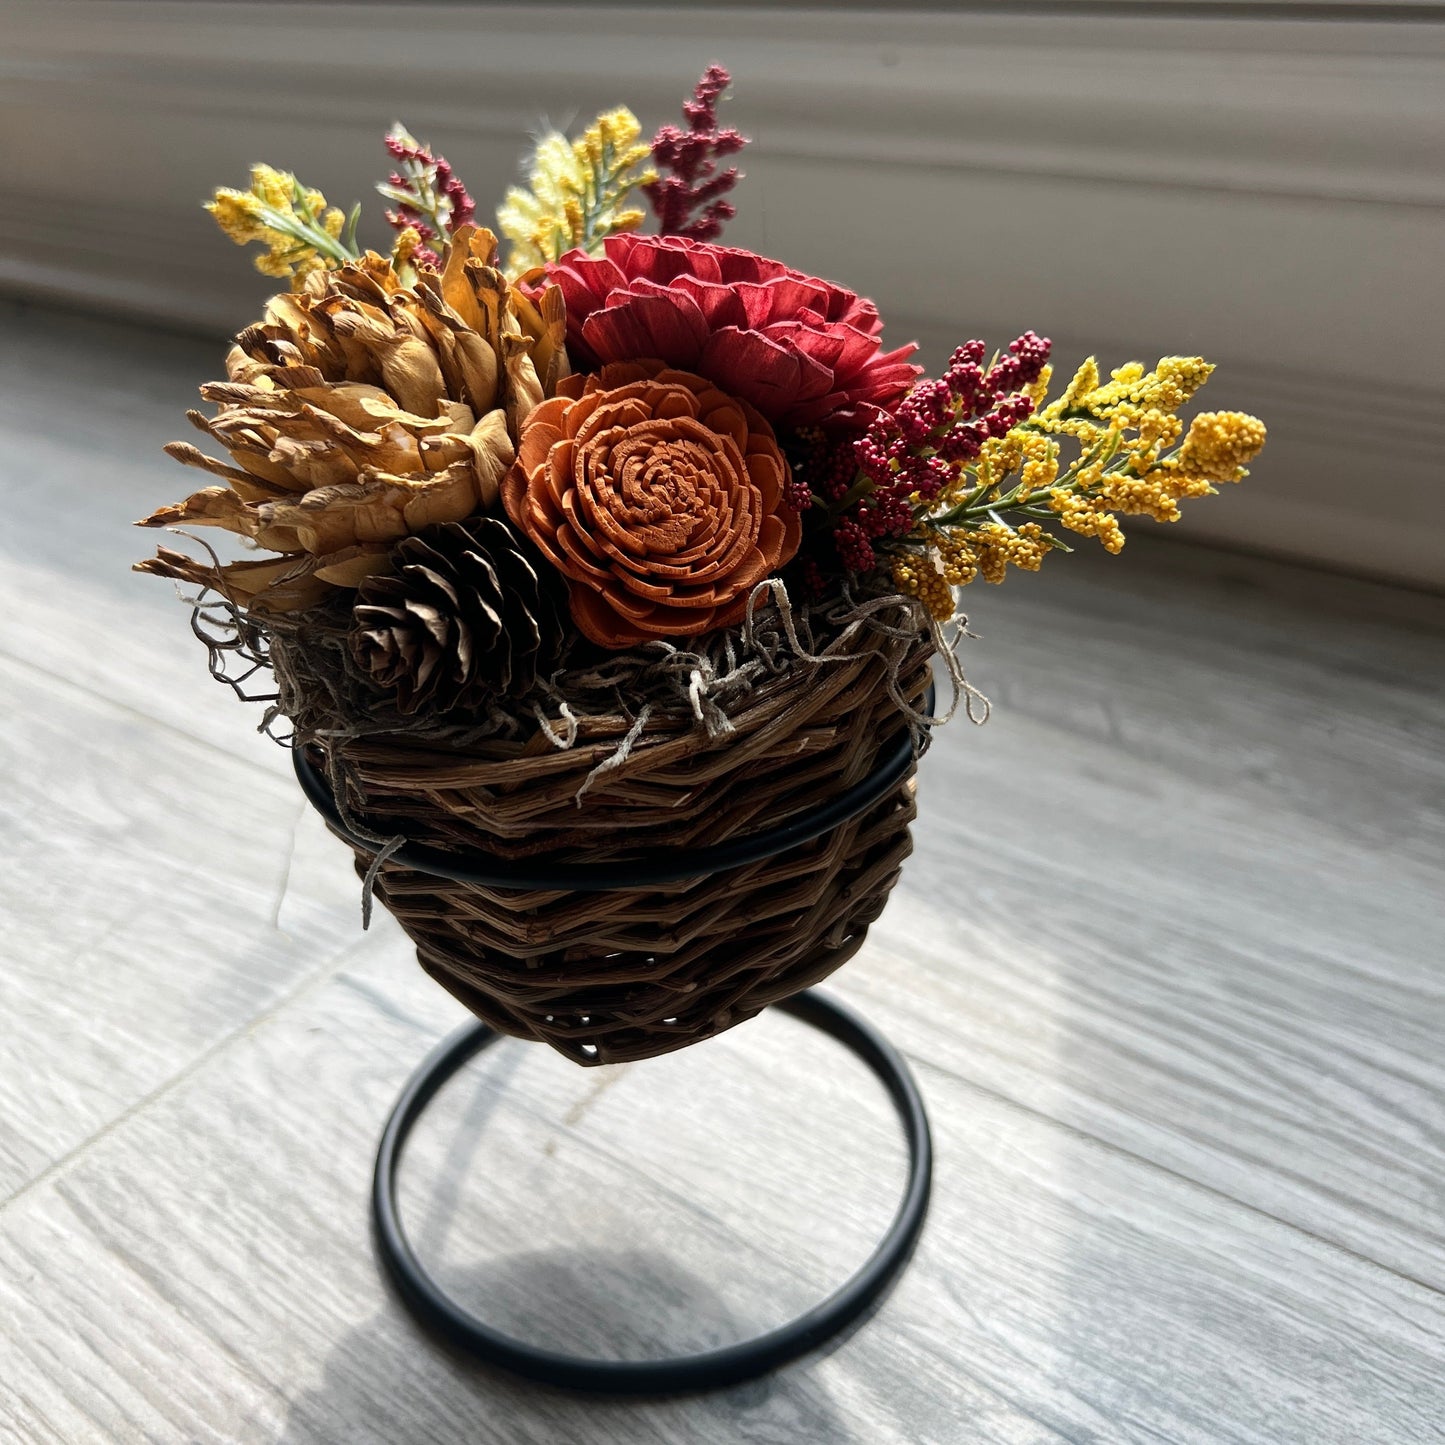 Radiant Harvest Hues: Sola Wood Flower Basket with Fall Blooms